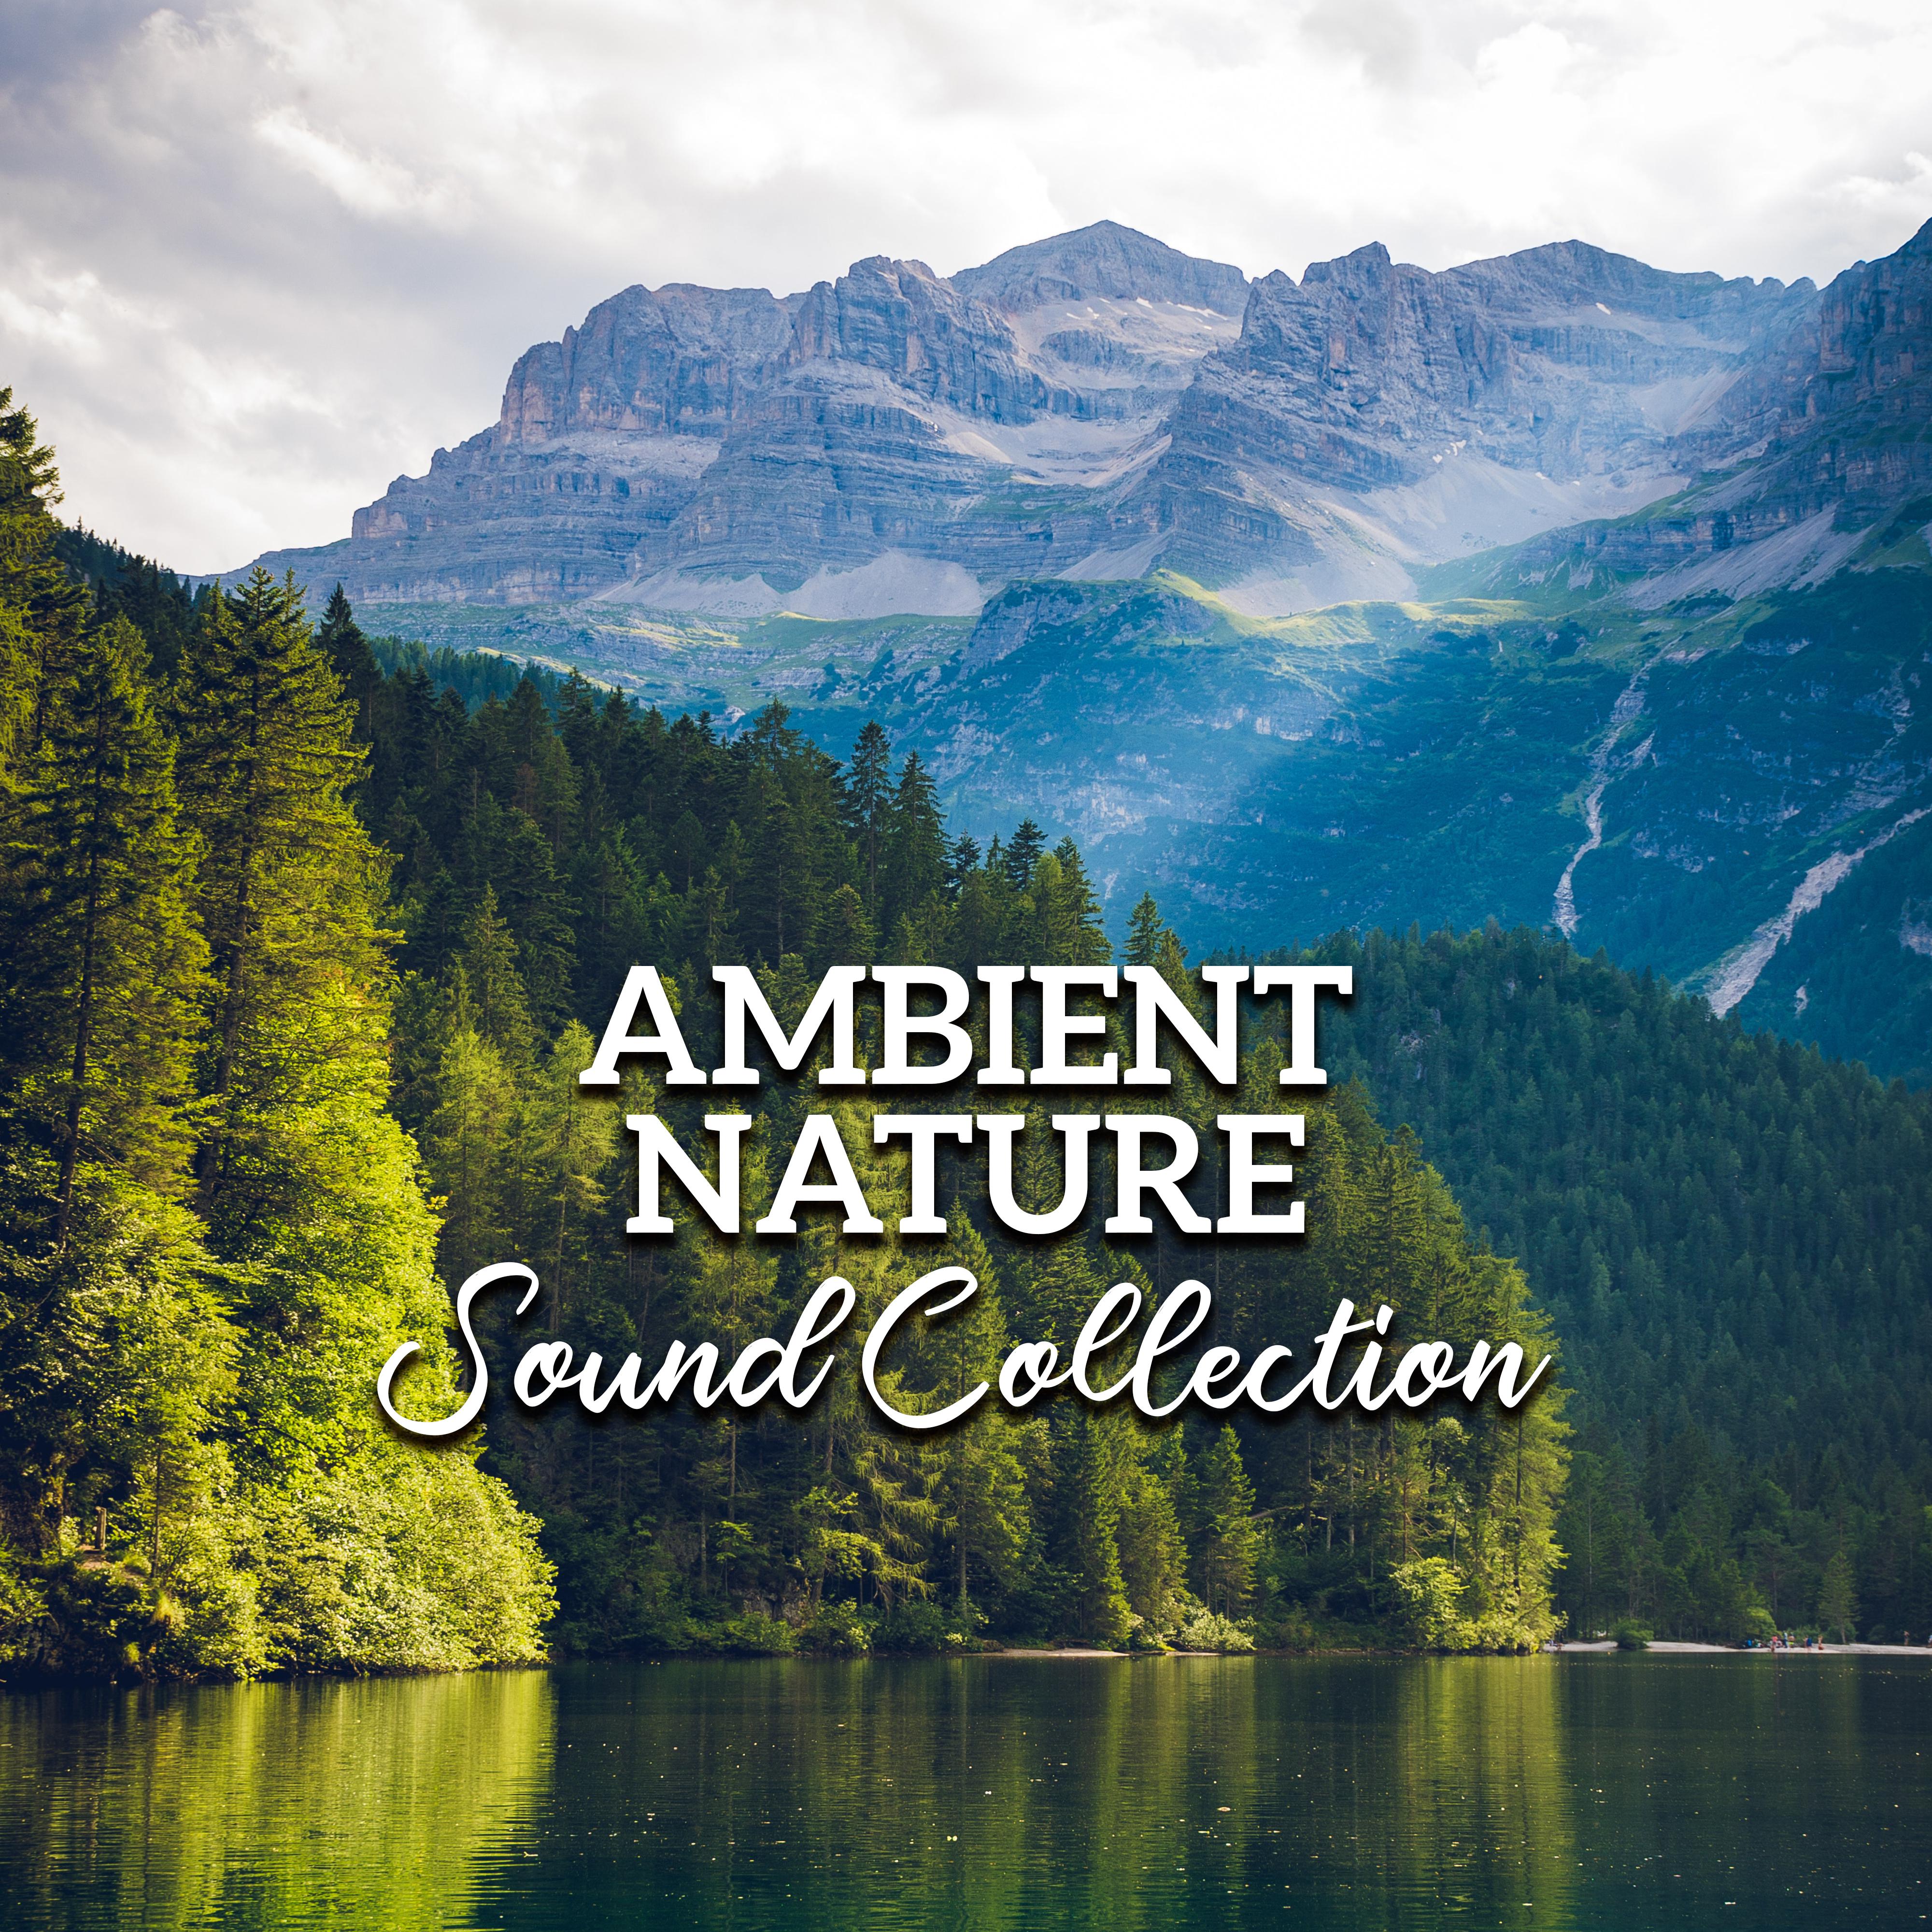 Ambient Nature Sound Collection: Sounds of Nature for Sleep and Relaxation, Inner Bliss, Deep Harmony, Calm Down, Zen, Relaxing Music Therapy